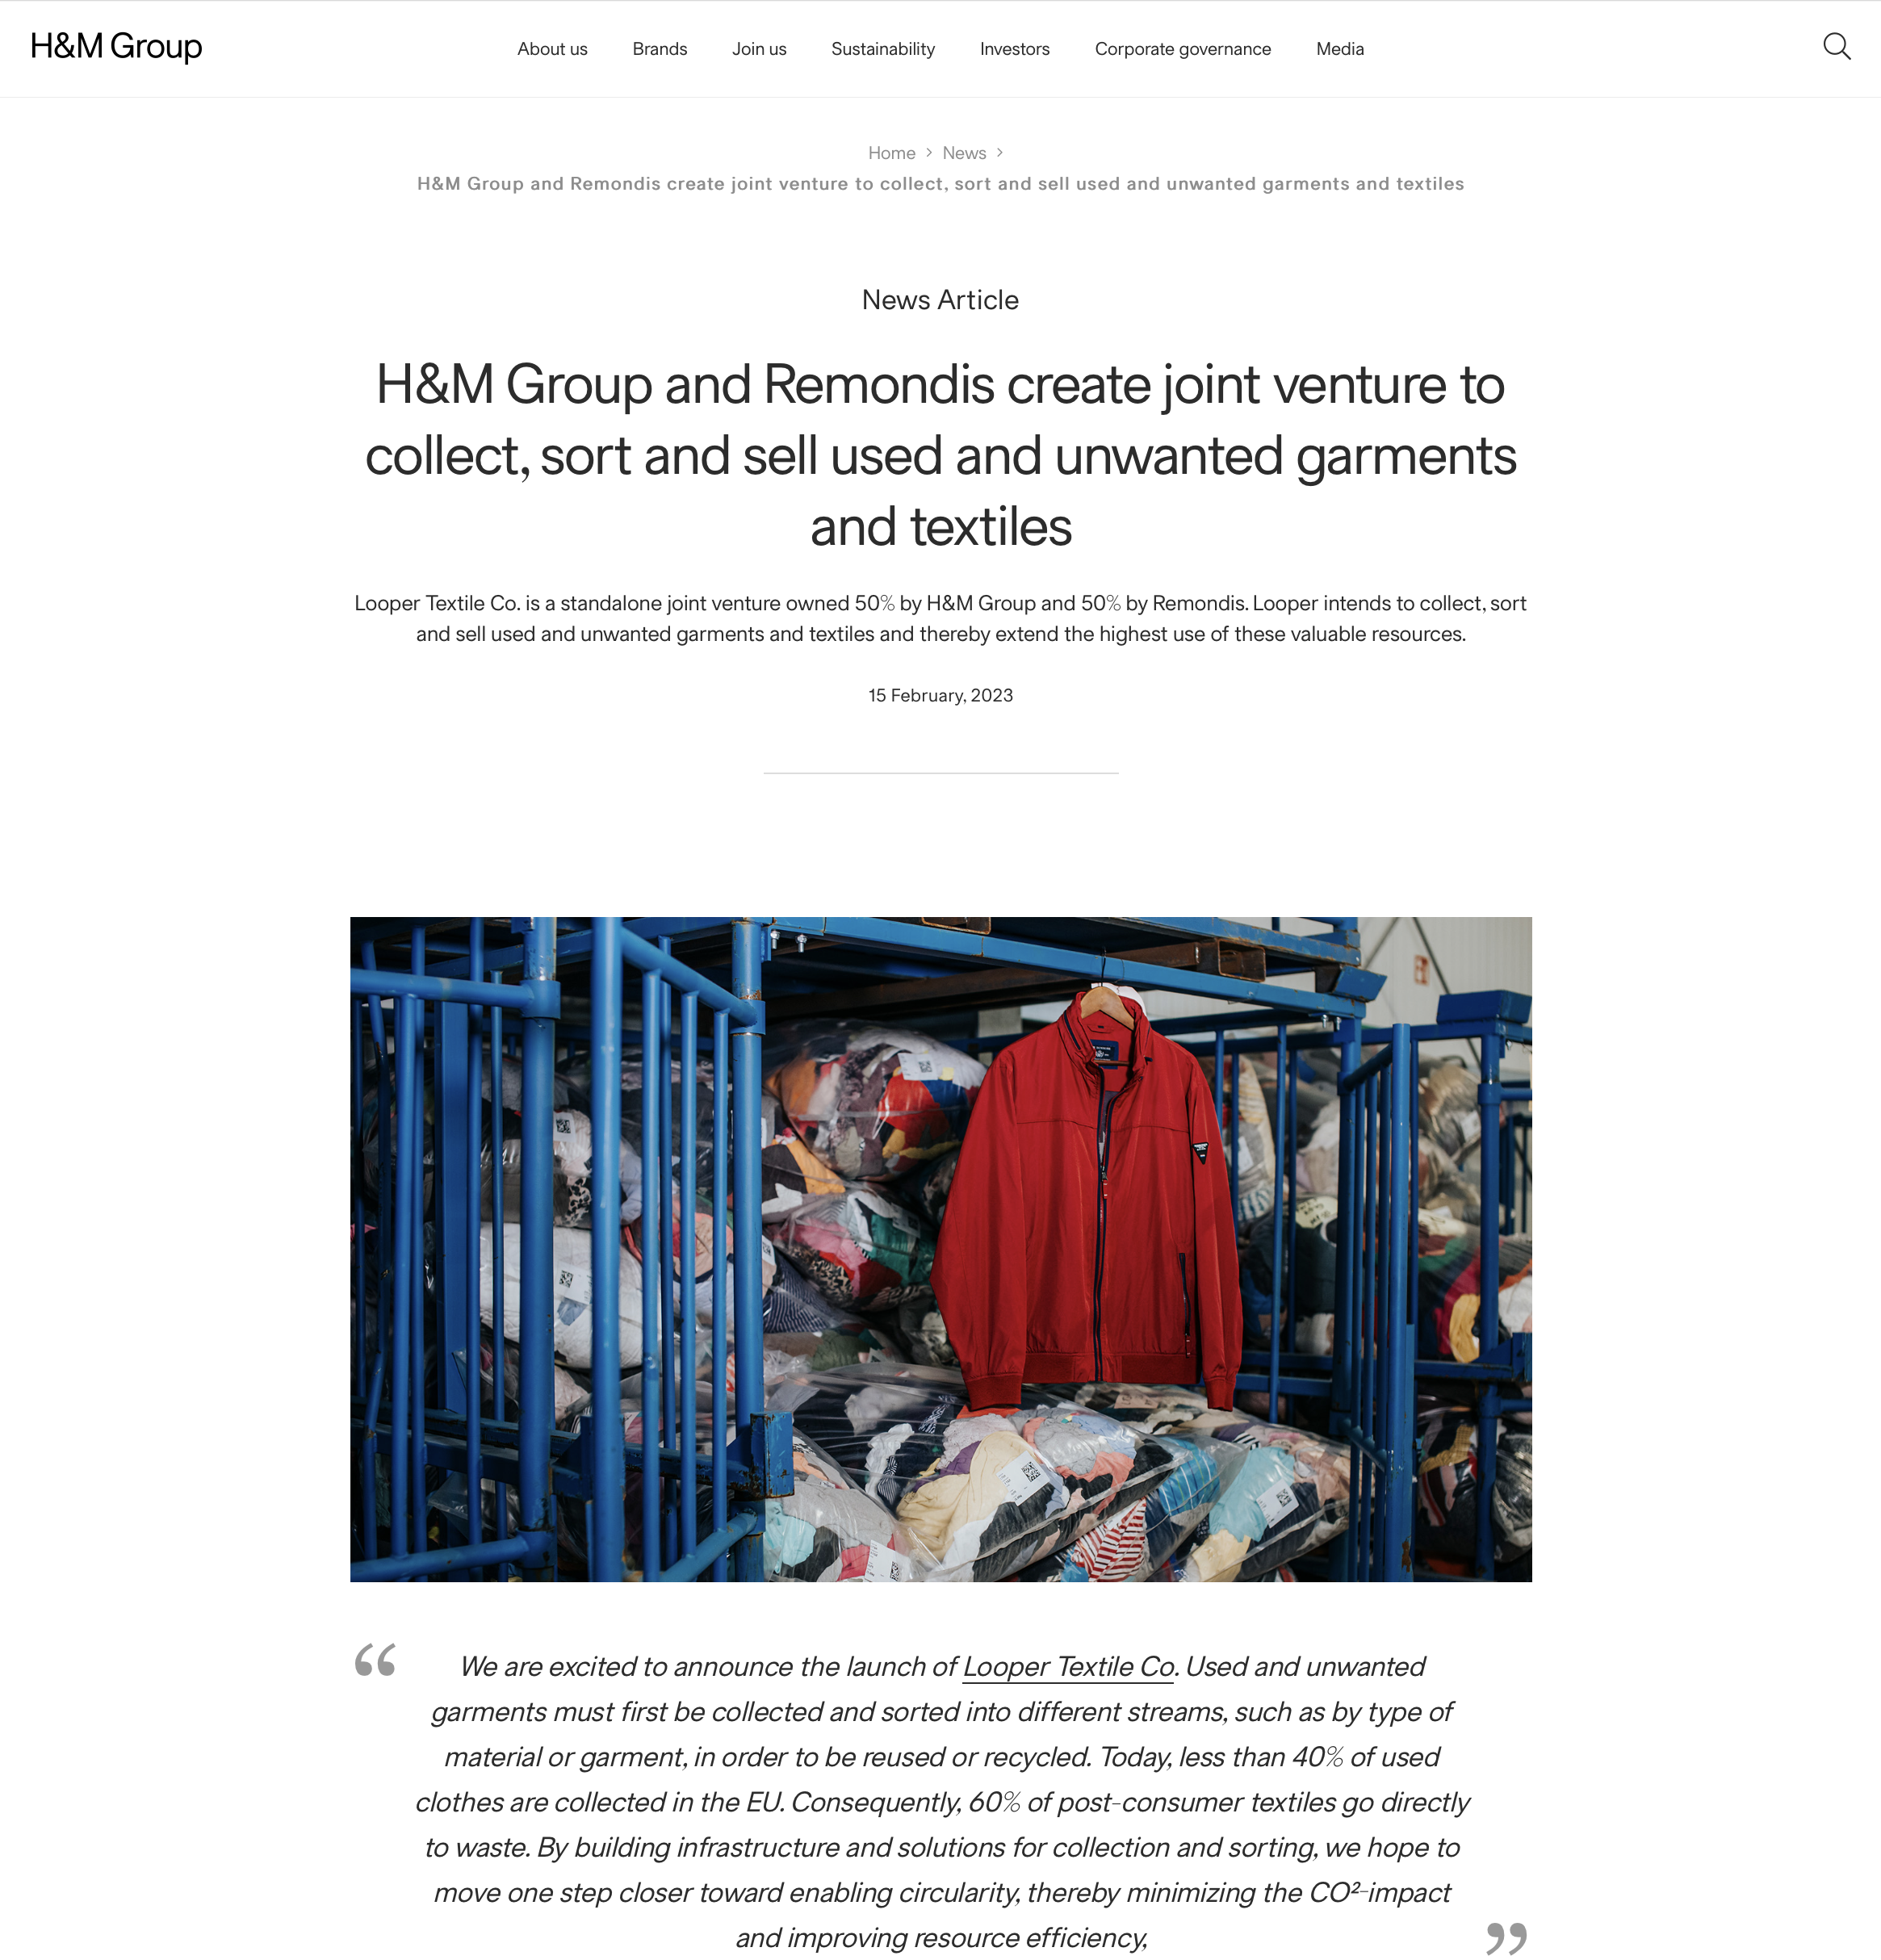 H&M Group and Remondis create joint venture. — Looper Textile Co.